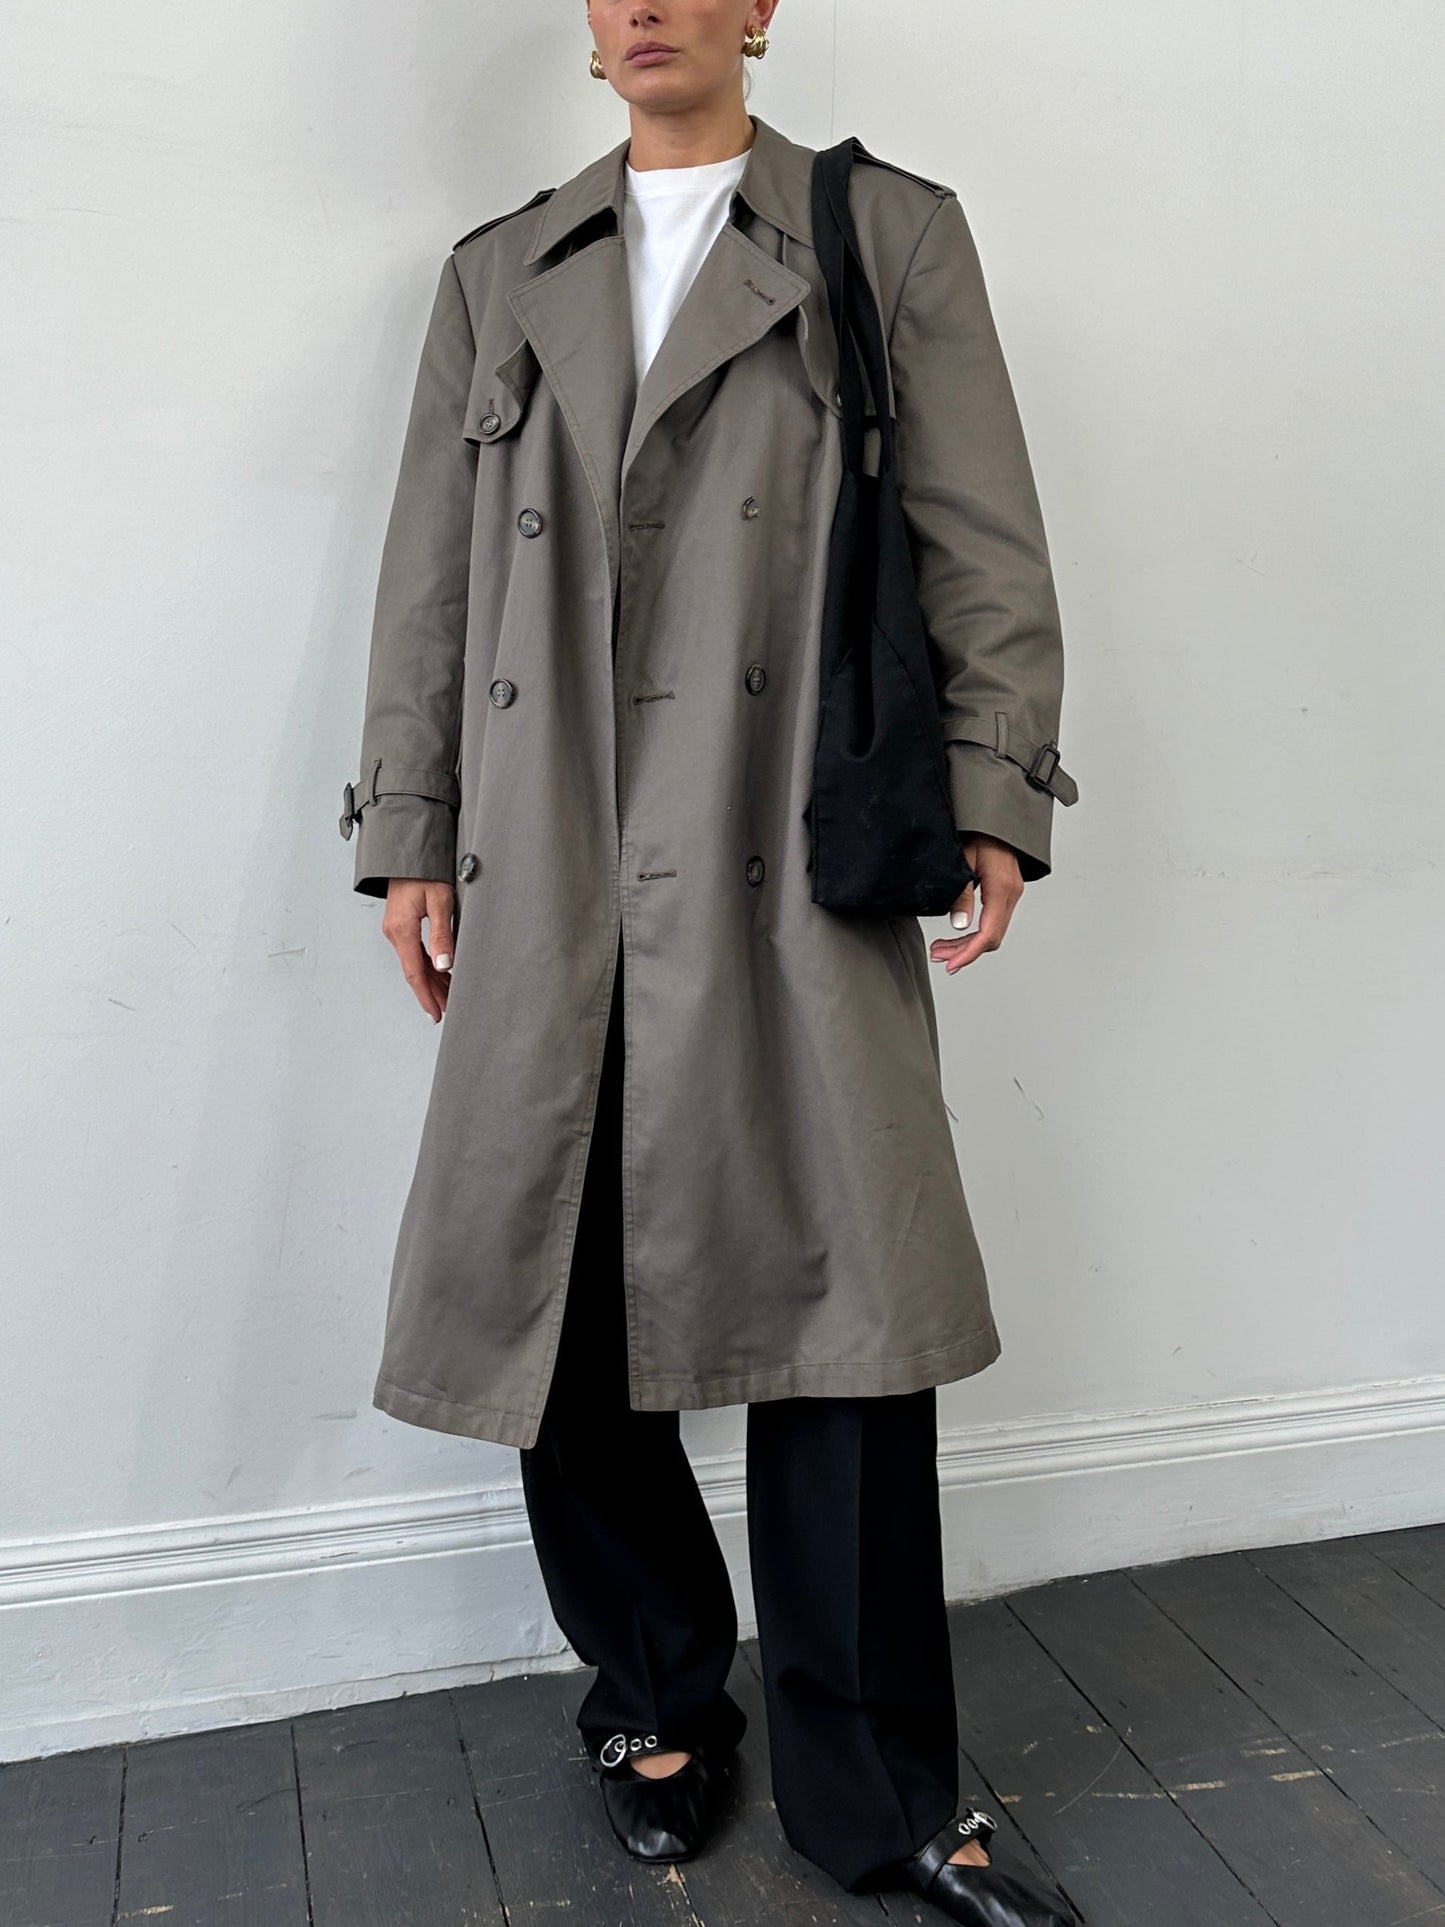 Christian Dior Monsieur Double Breasted Belted Trench Coat - M/L